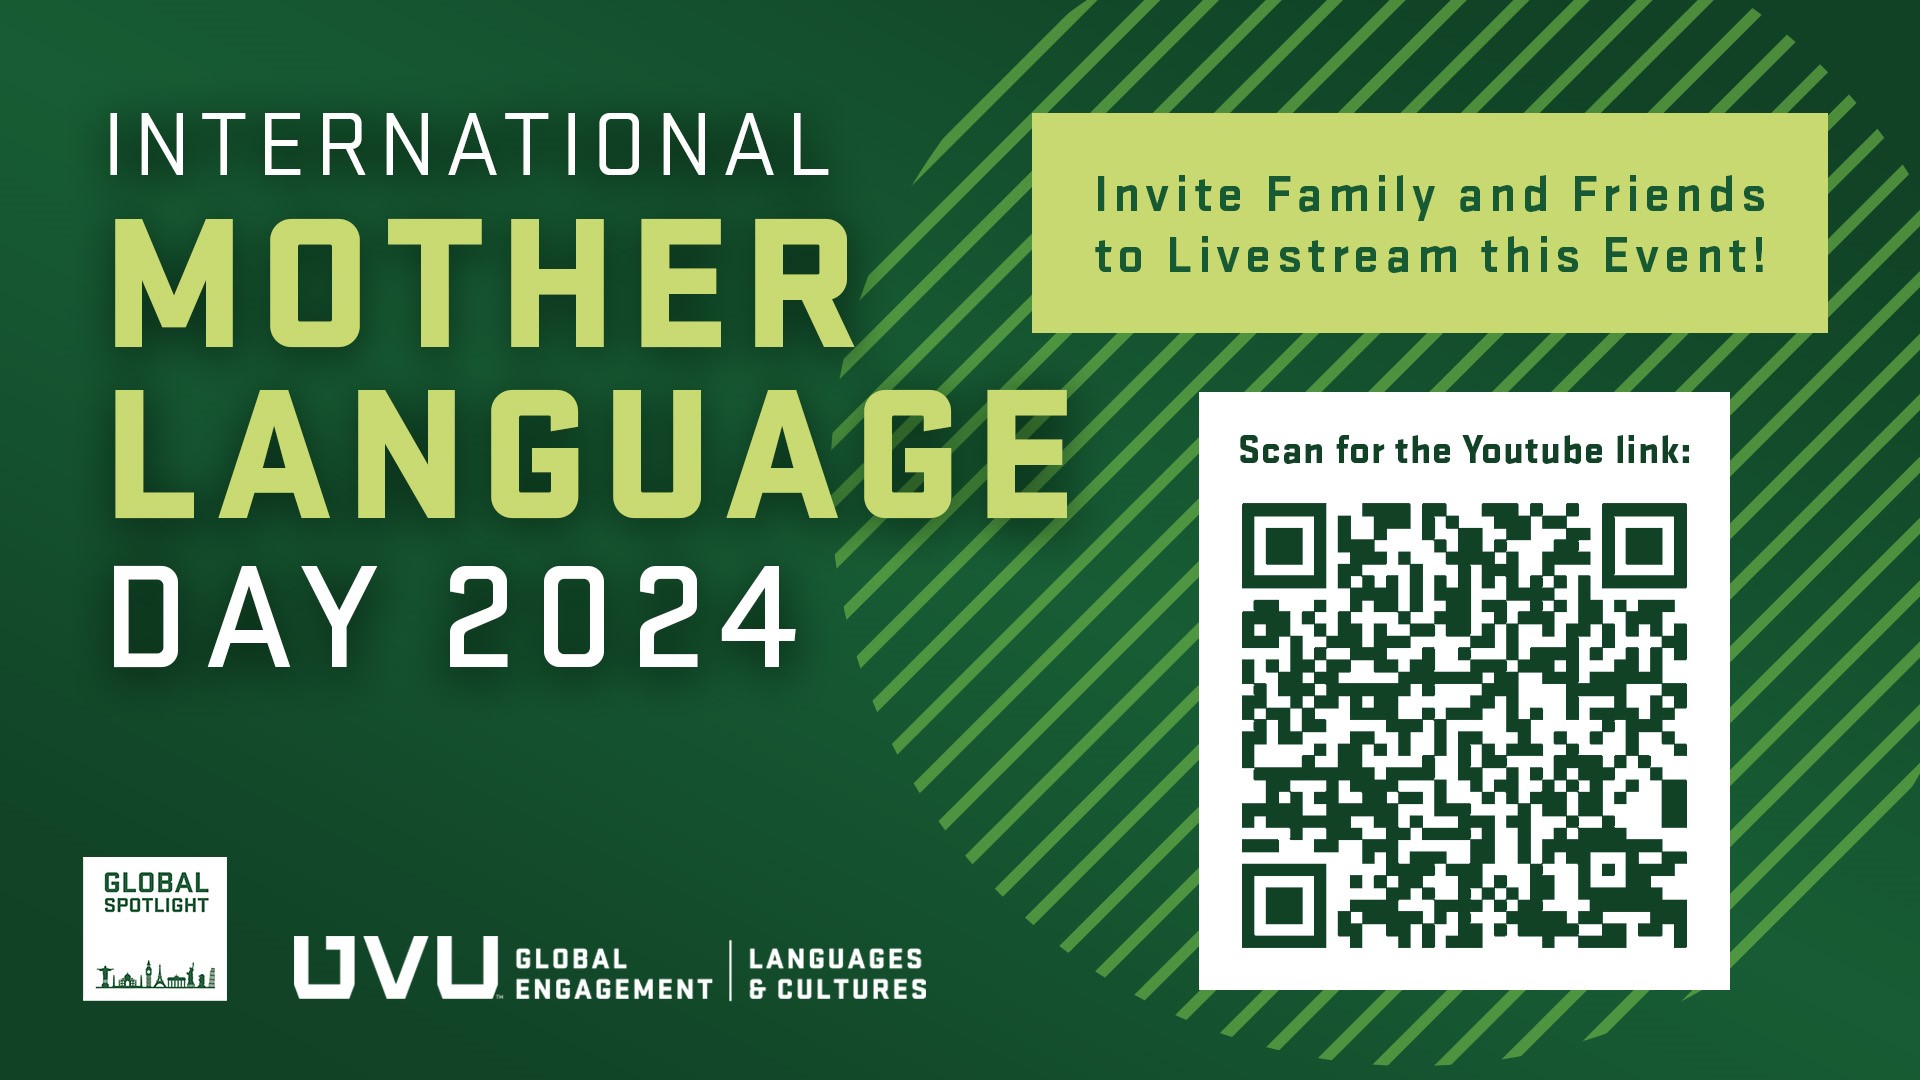 QR code for international mother language day event livestreaming.